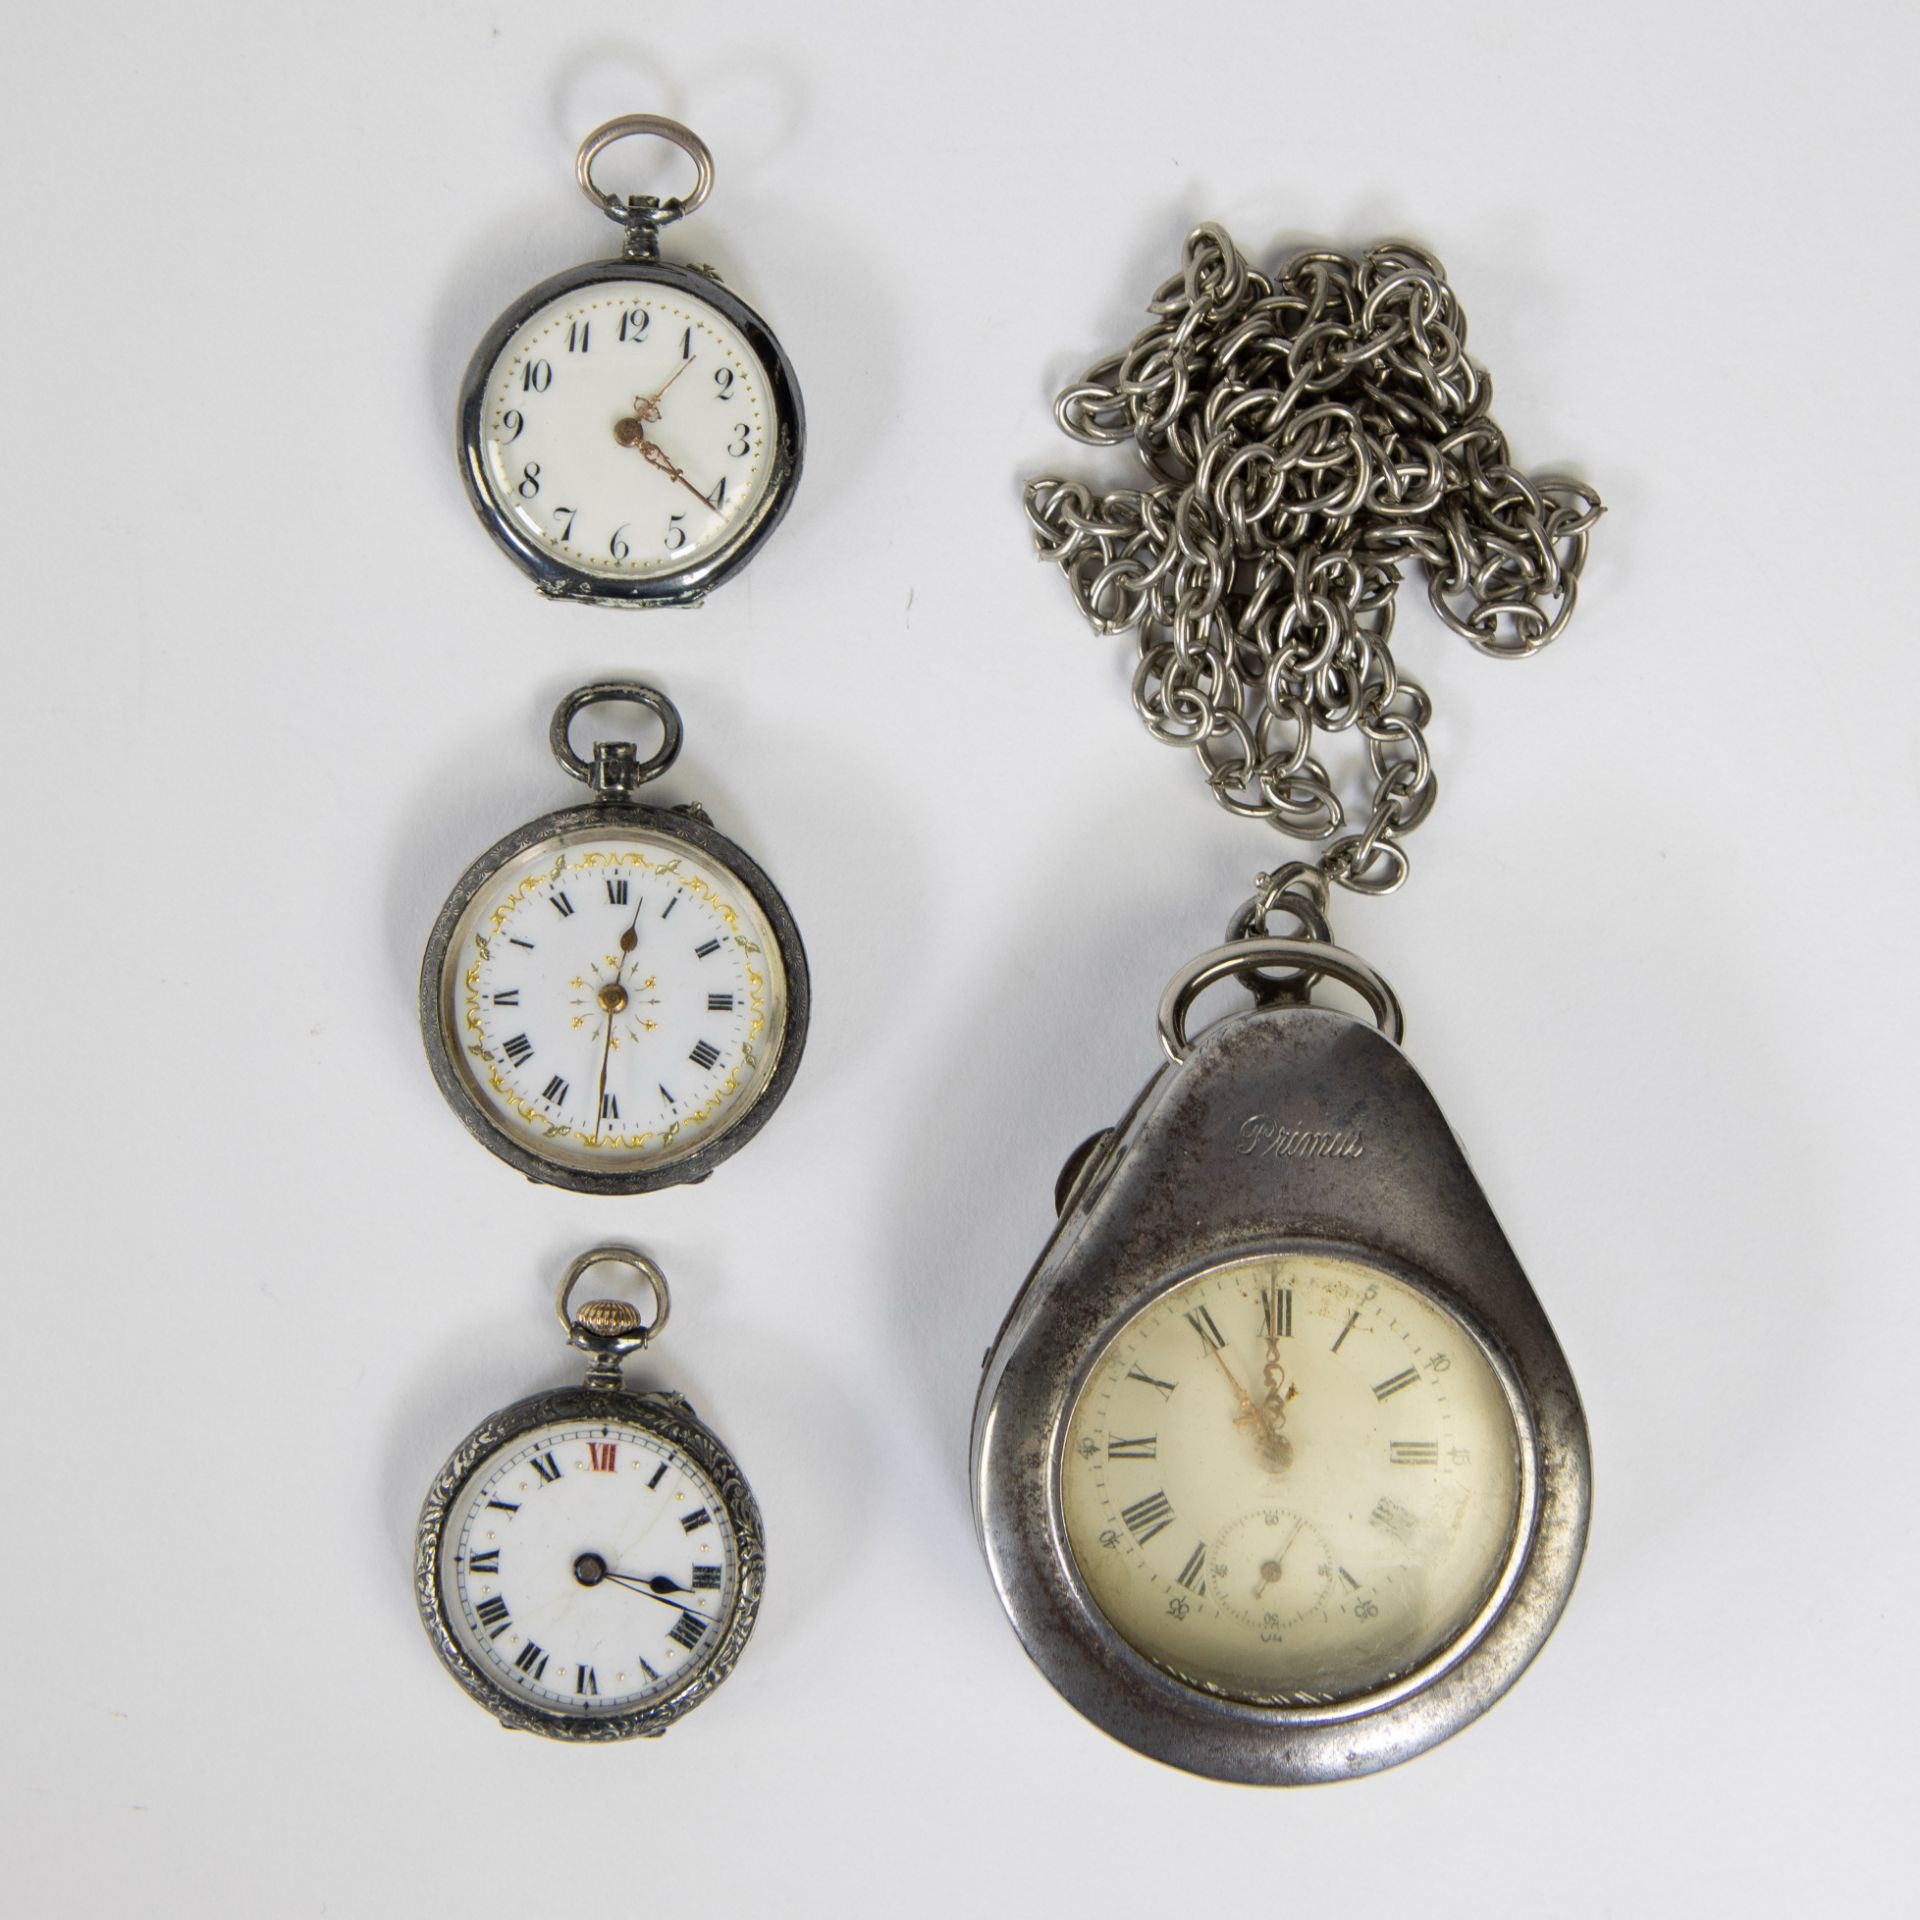 4 pocket watches, 3 of which are silver